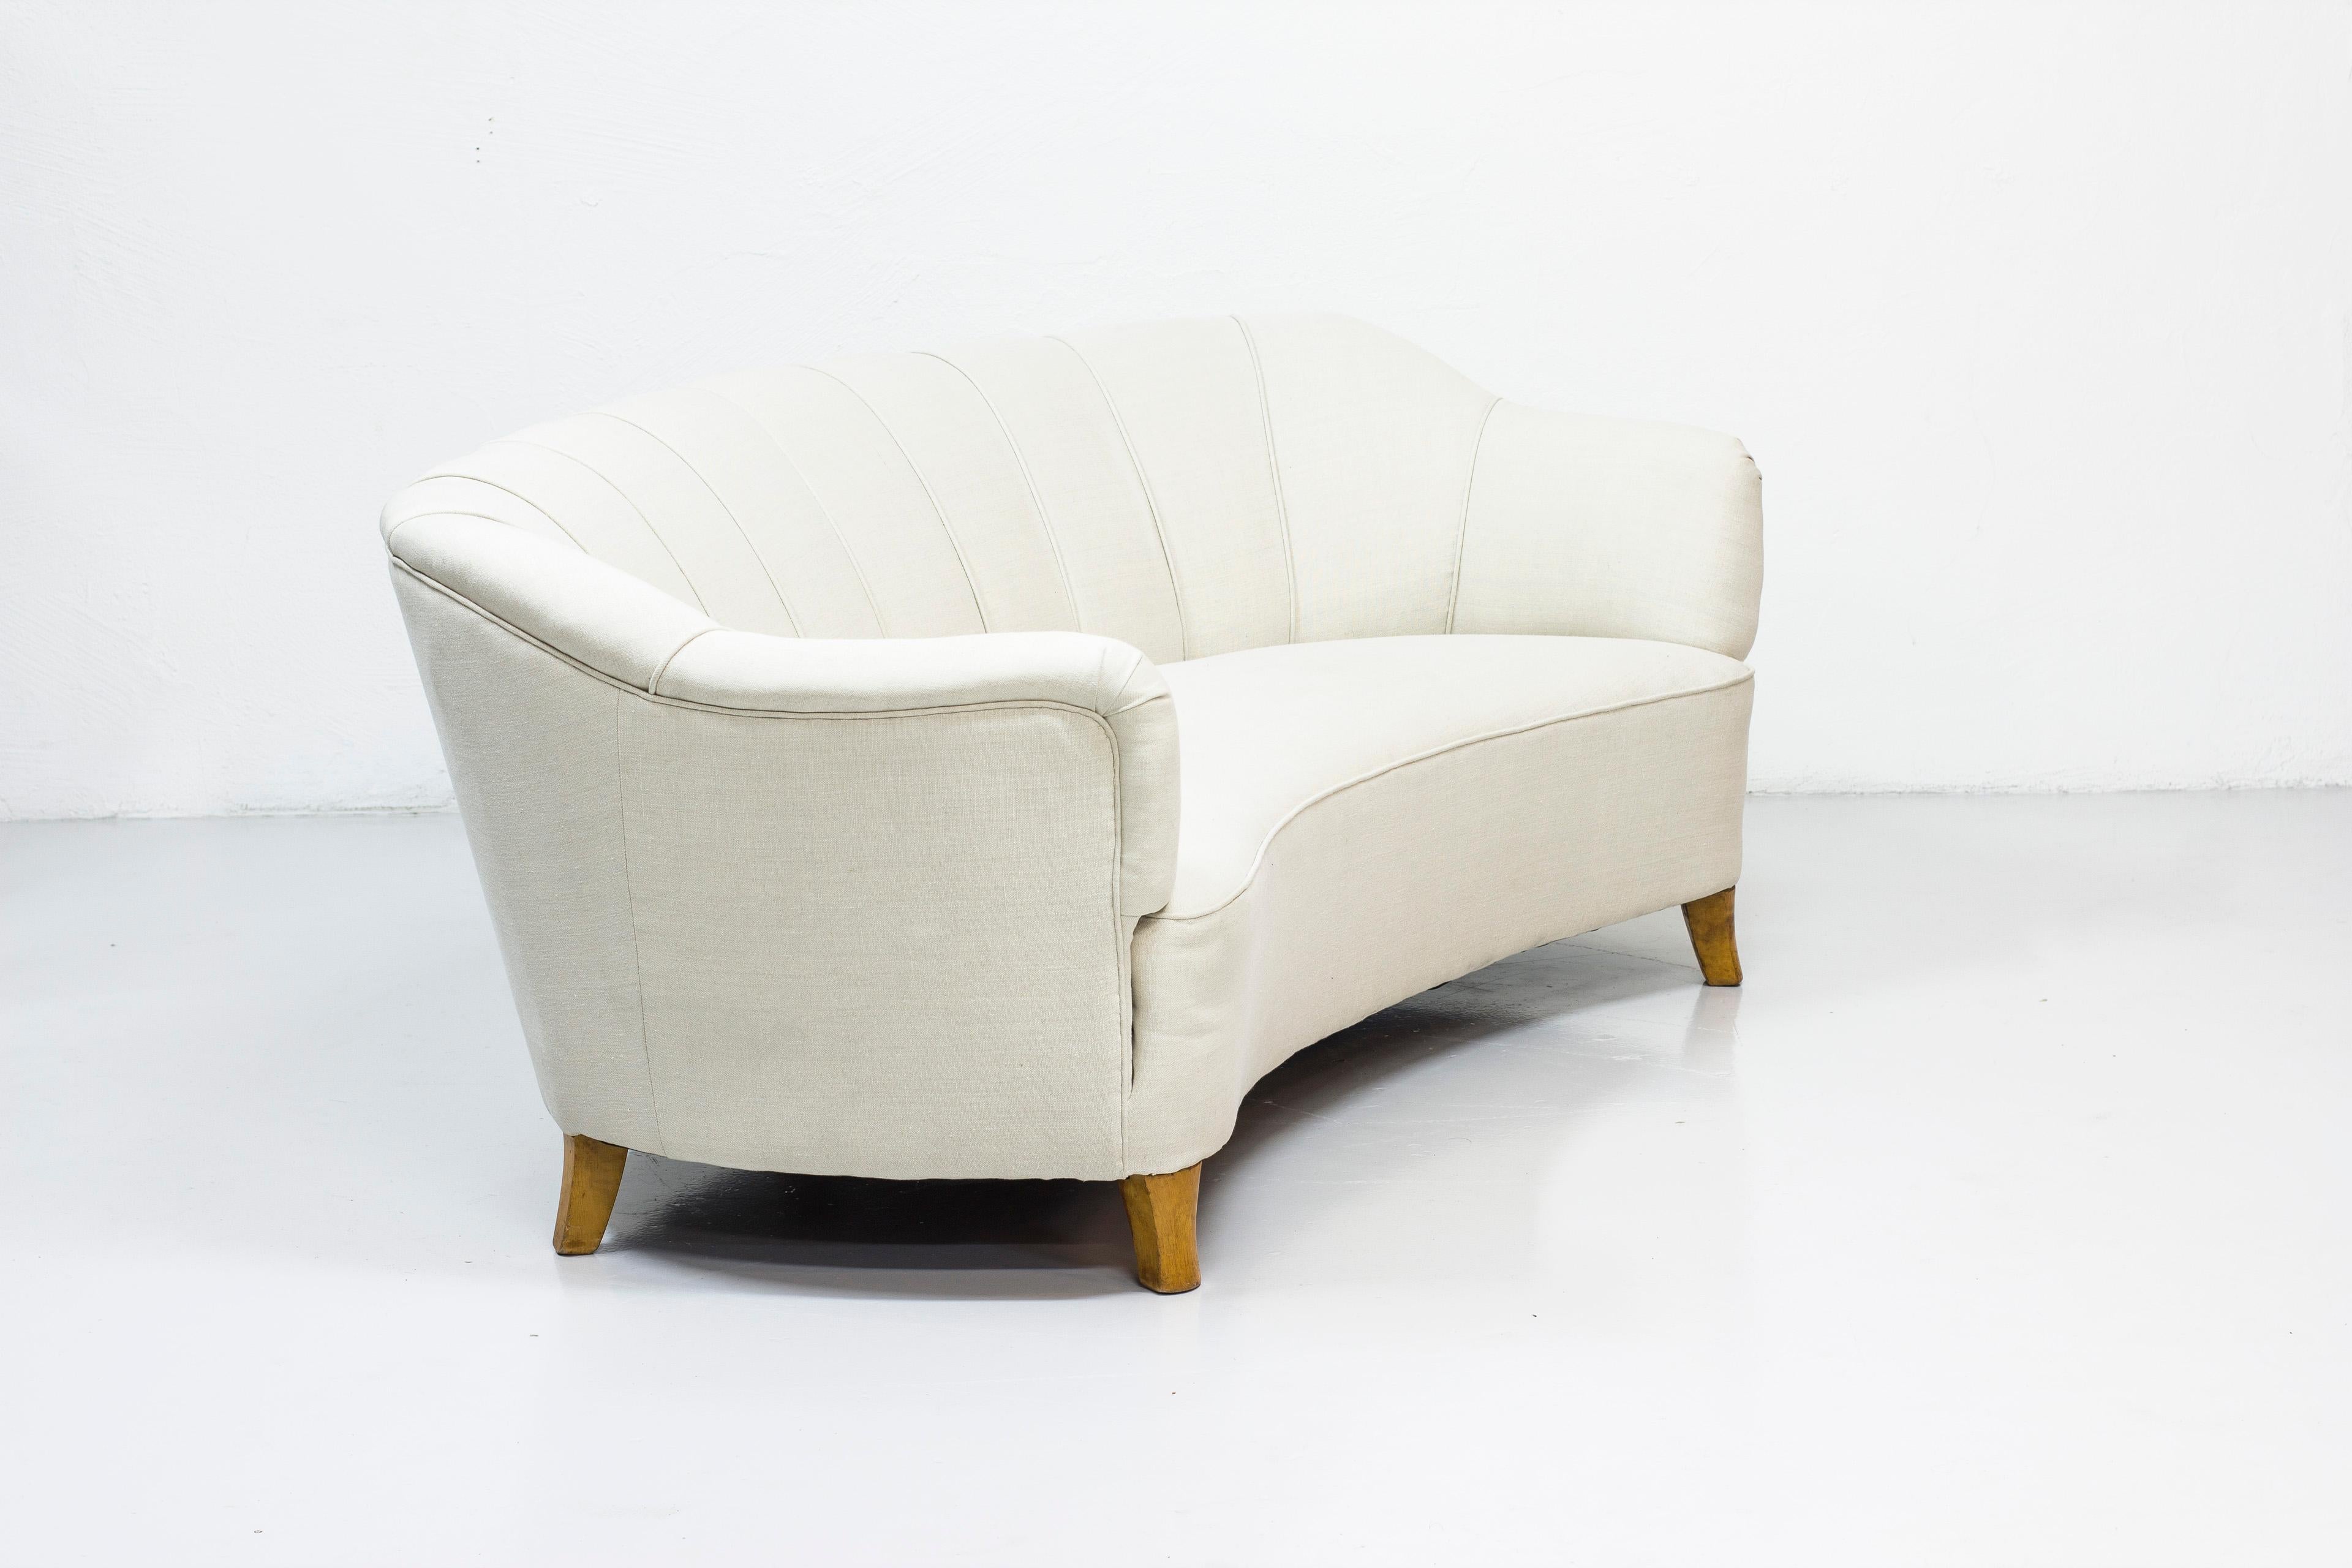 Soffa attributed to Otto Schulz and his company Boet. Produced in Sweden during the 1930s-1940s. Birch legs and recently upholstered in Linen fabric in beige. Very good condition with small signs of patina from use and wear.